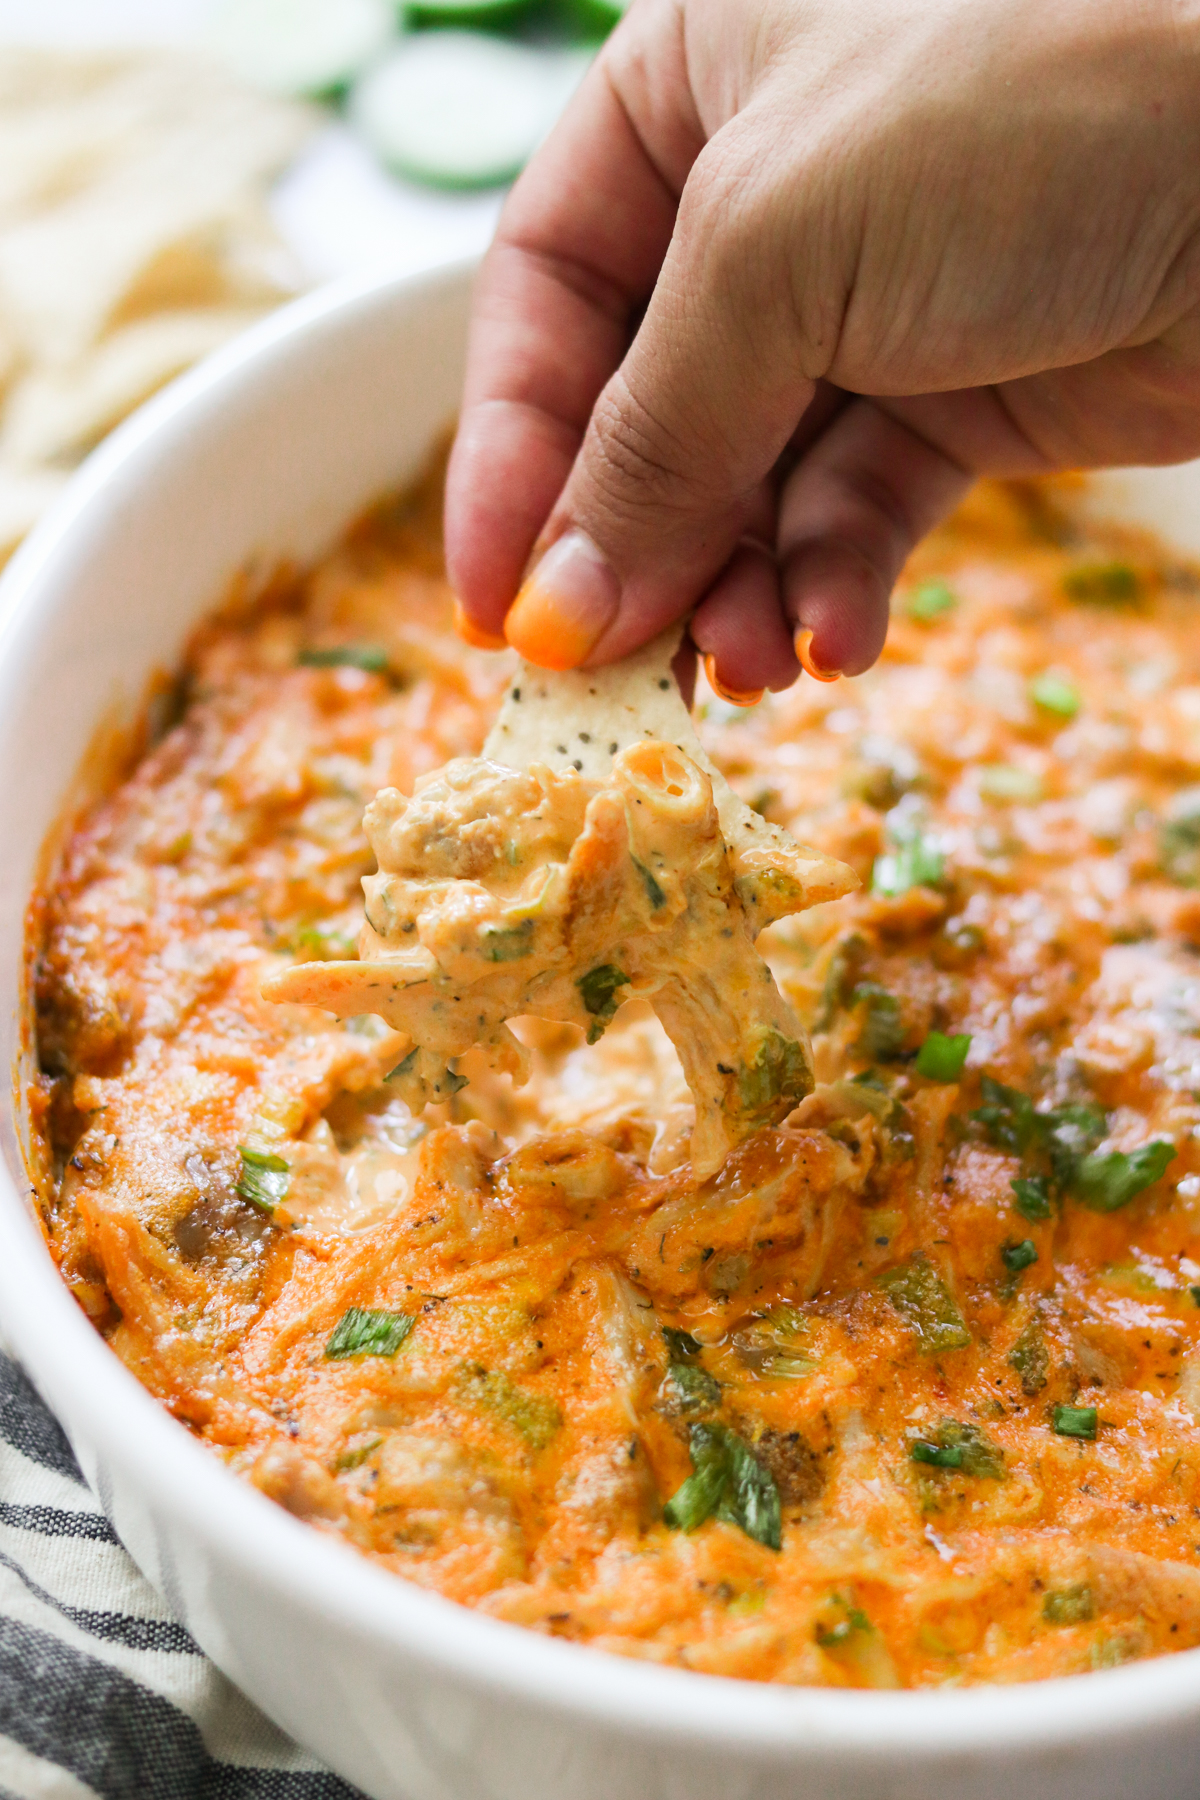 a hand dipping a chip into a creamy, cheesy chicken dip